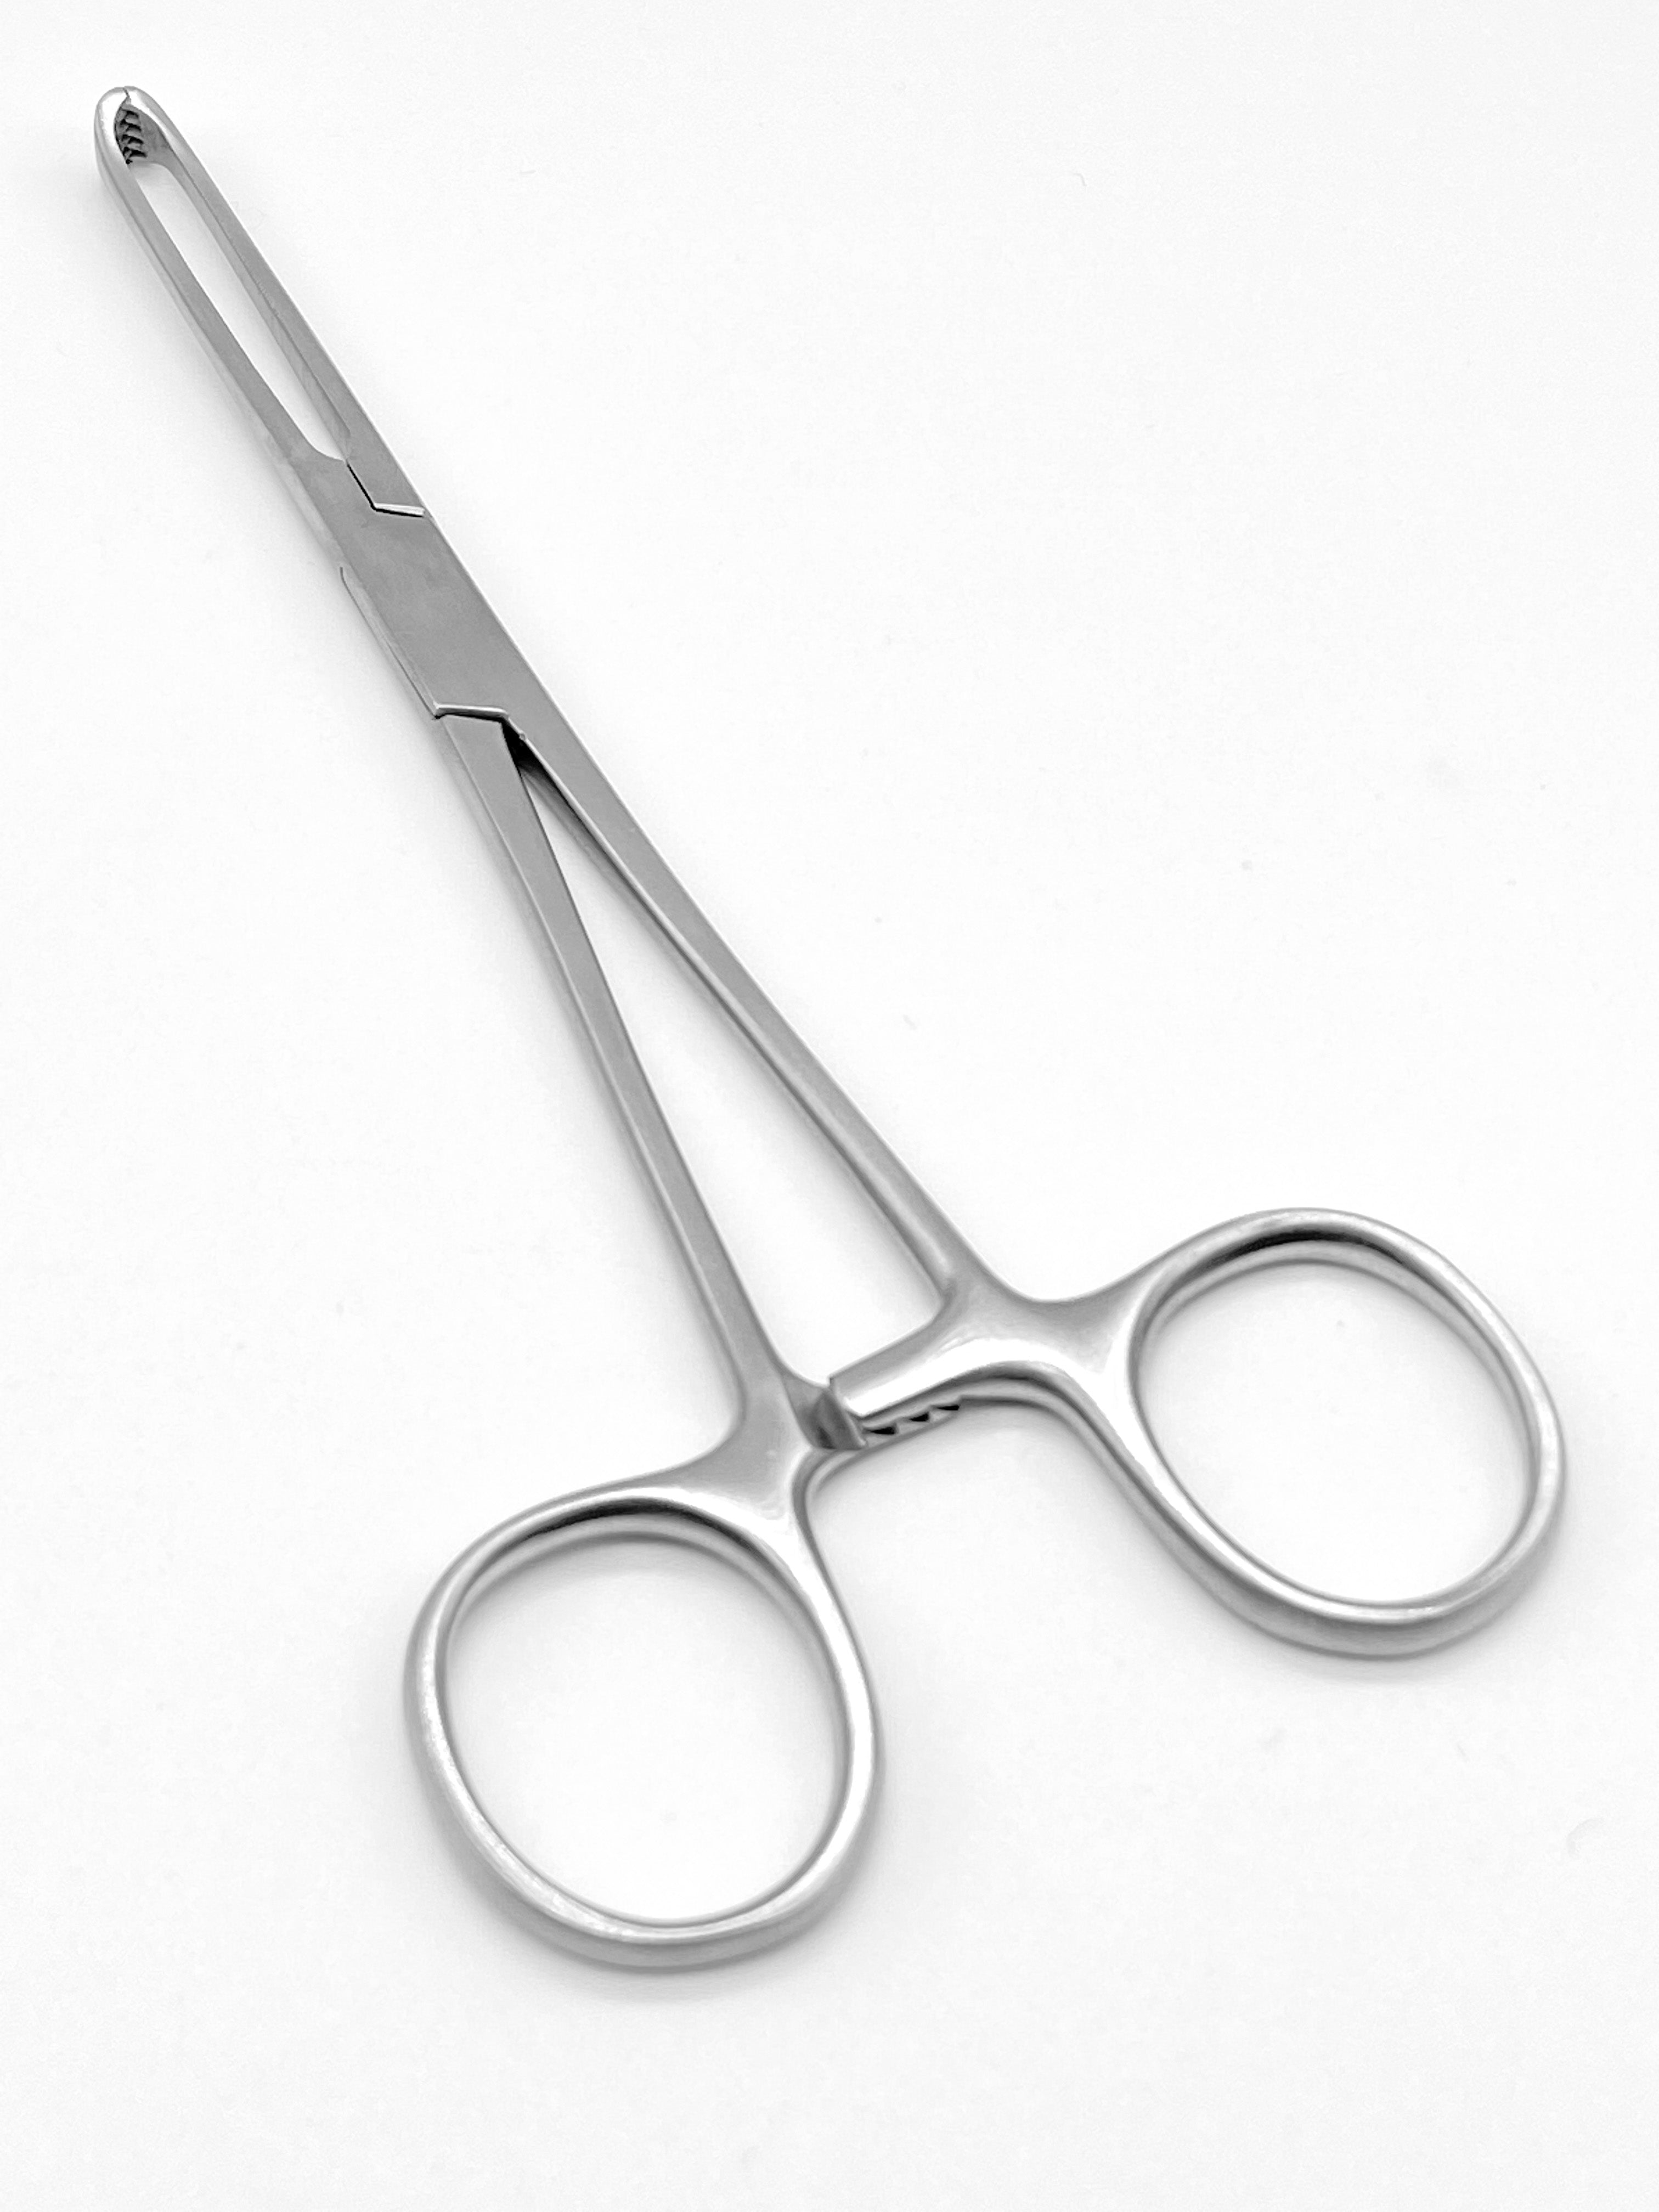 Artery Forceps - Allis Tissue Forceps - Surgical Podiatry Instruments